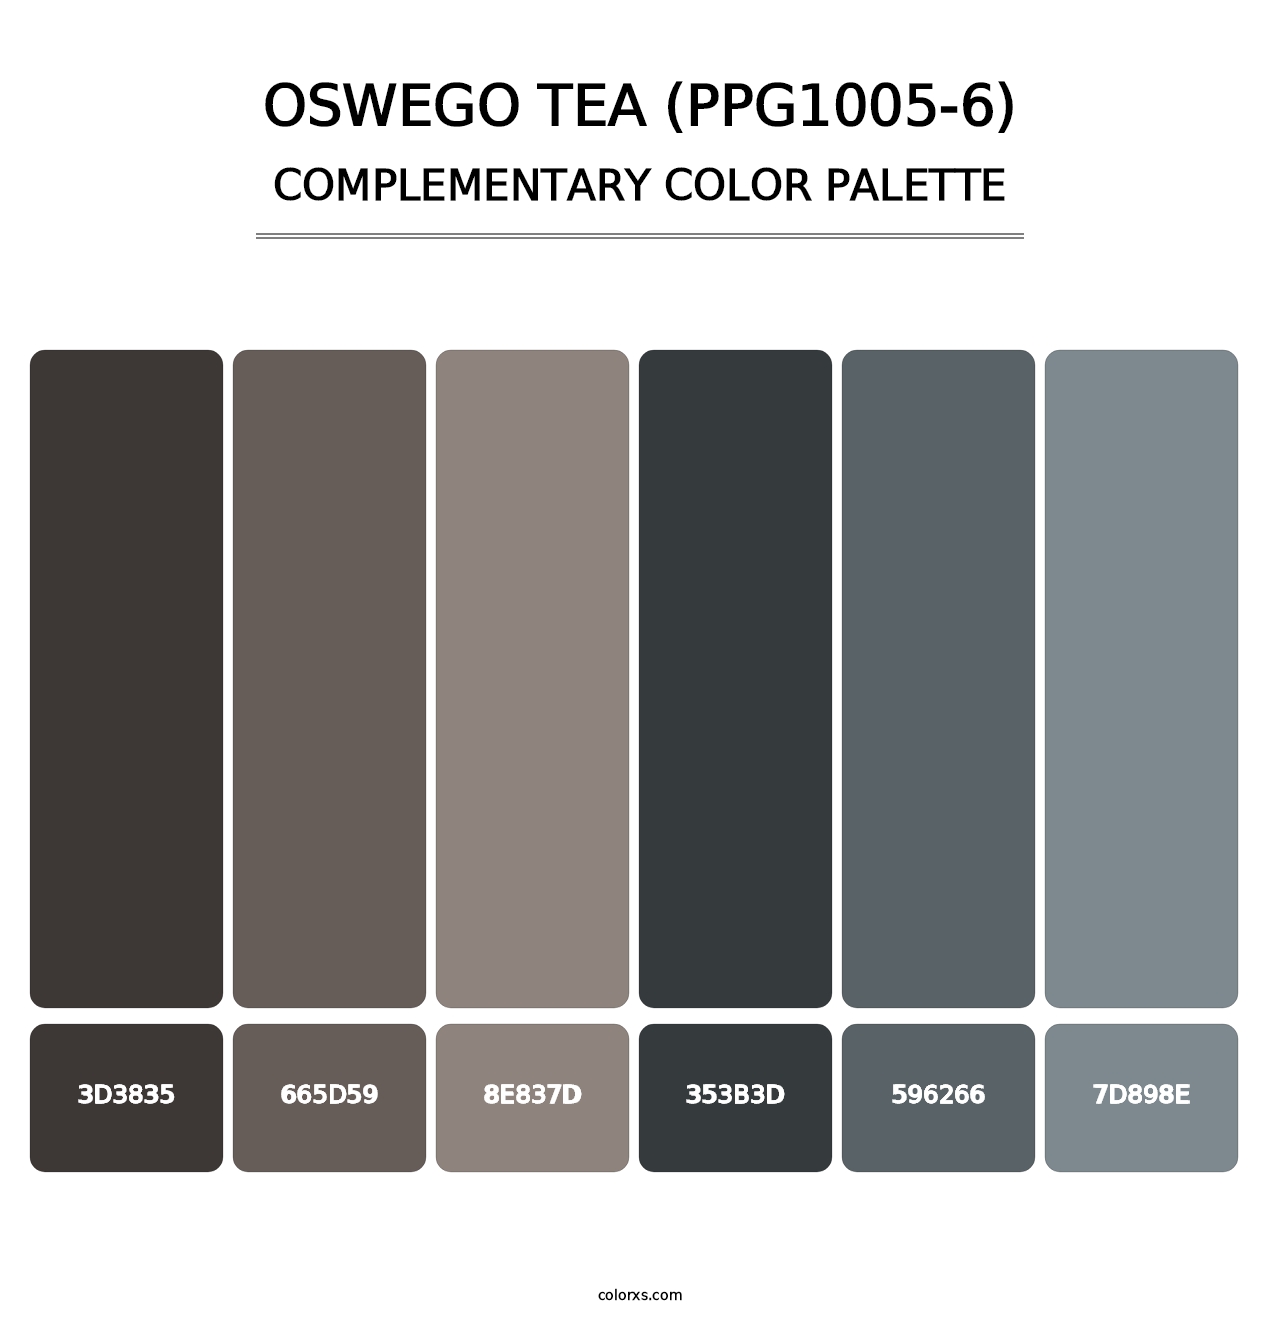 Oswego Tea (PPG1005-6) - Complementary Color Palette